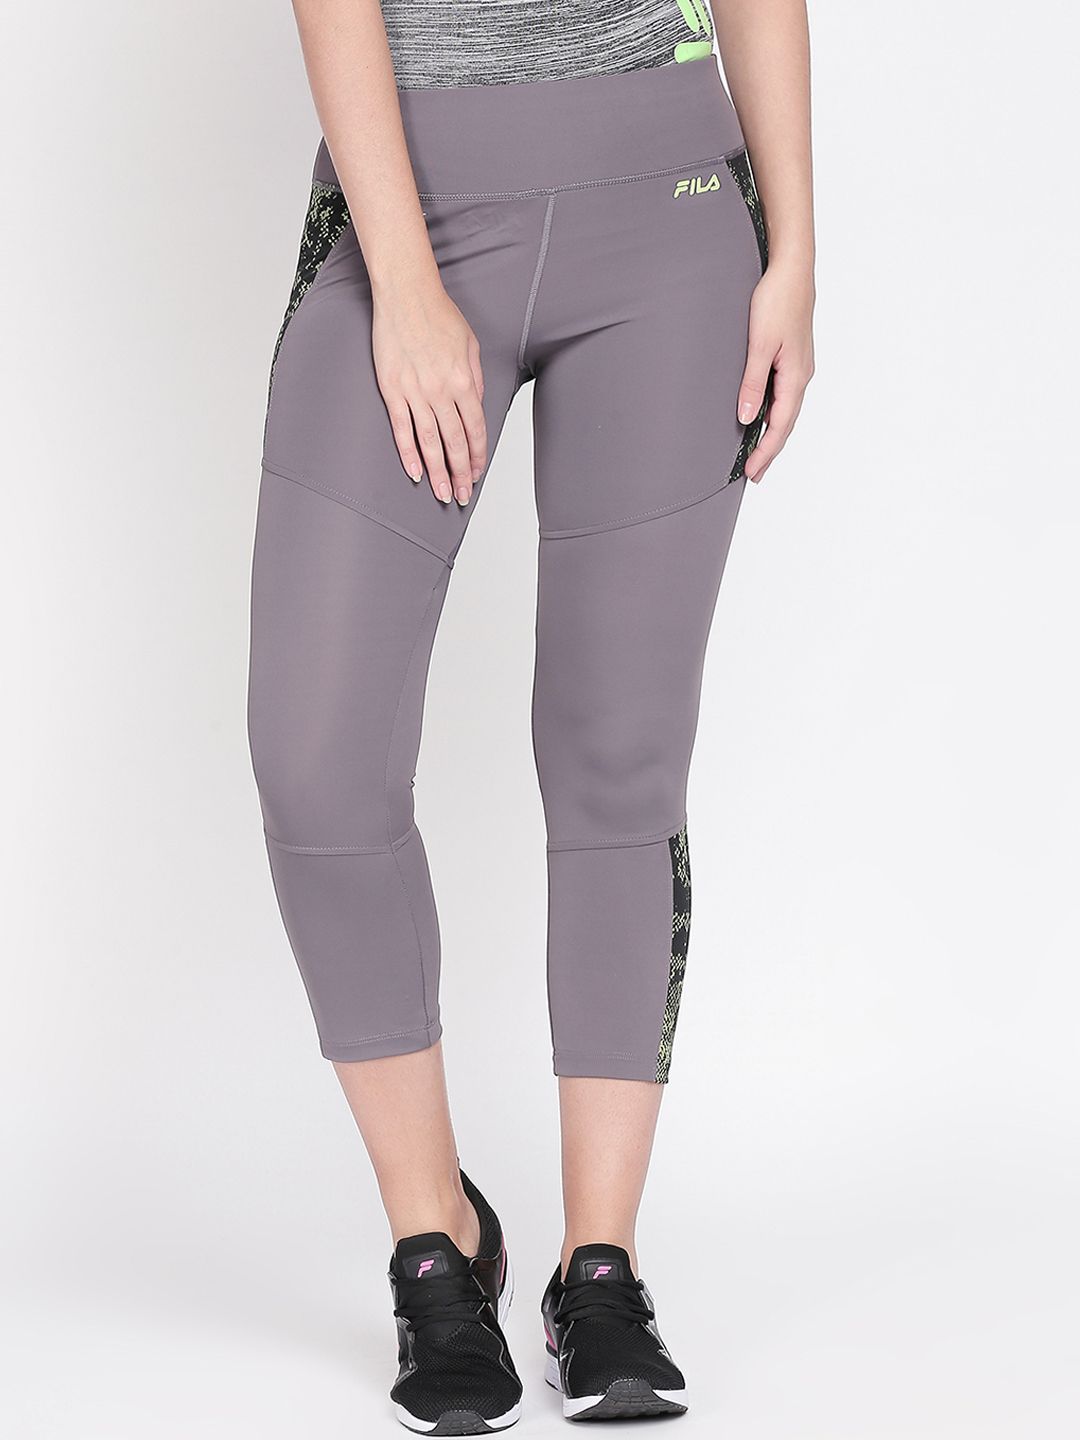 FILA Women Grey Solid Tights Price in India